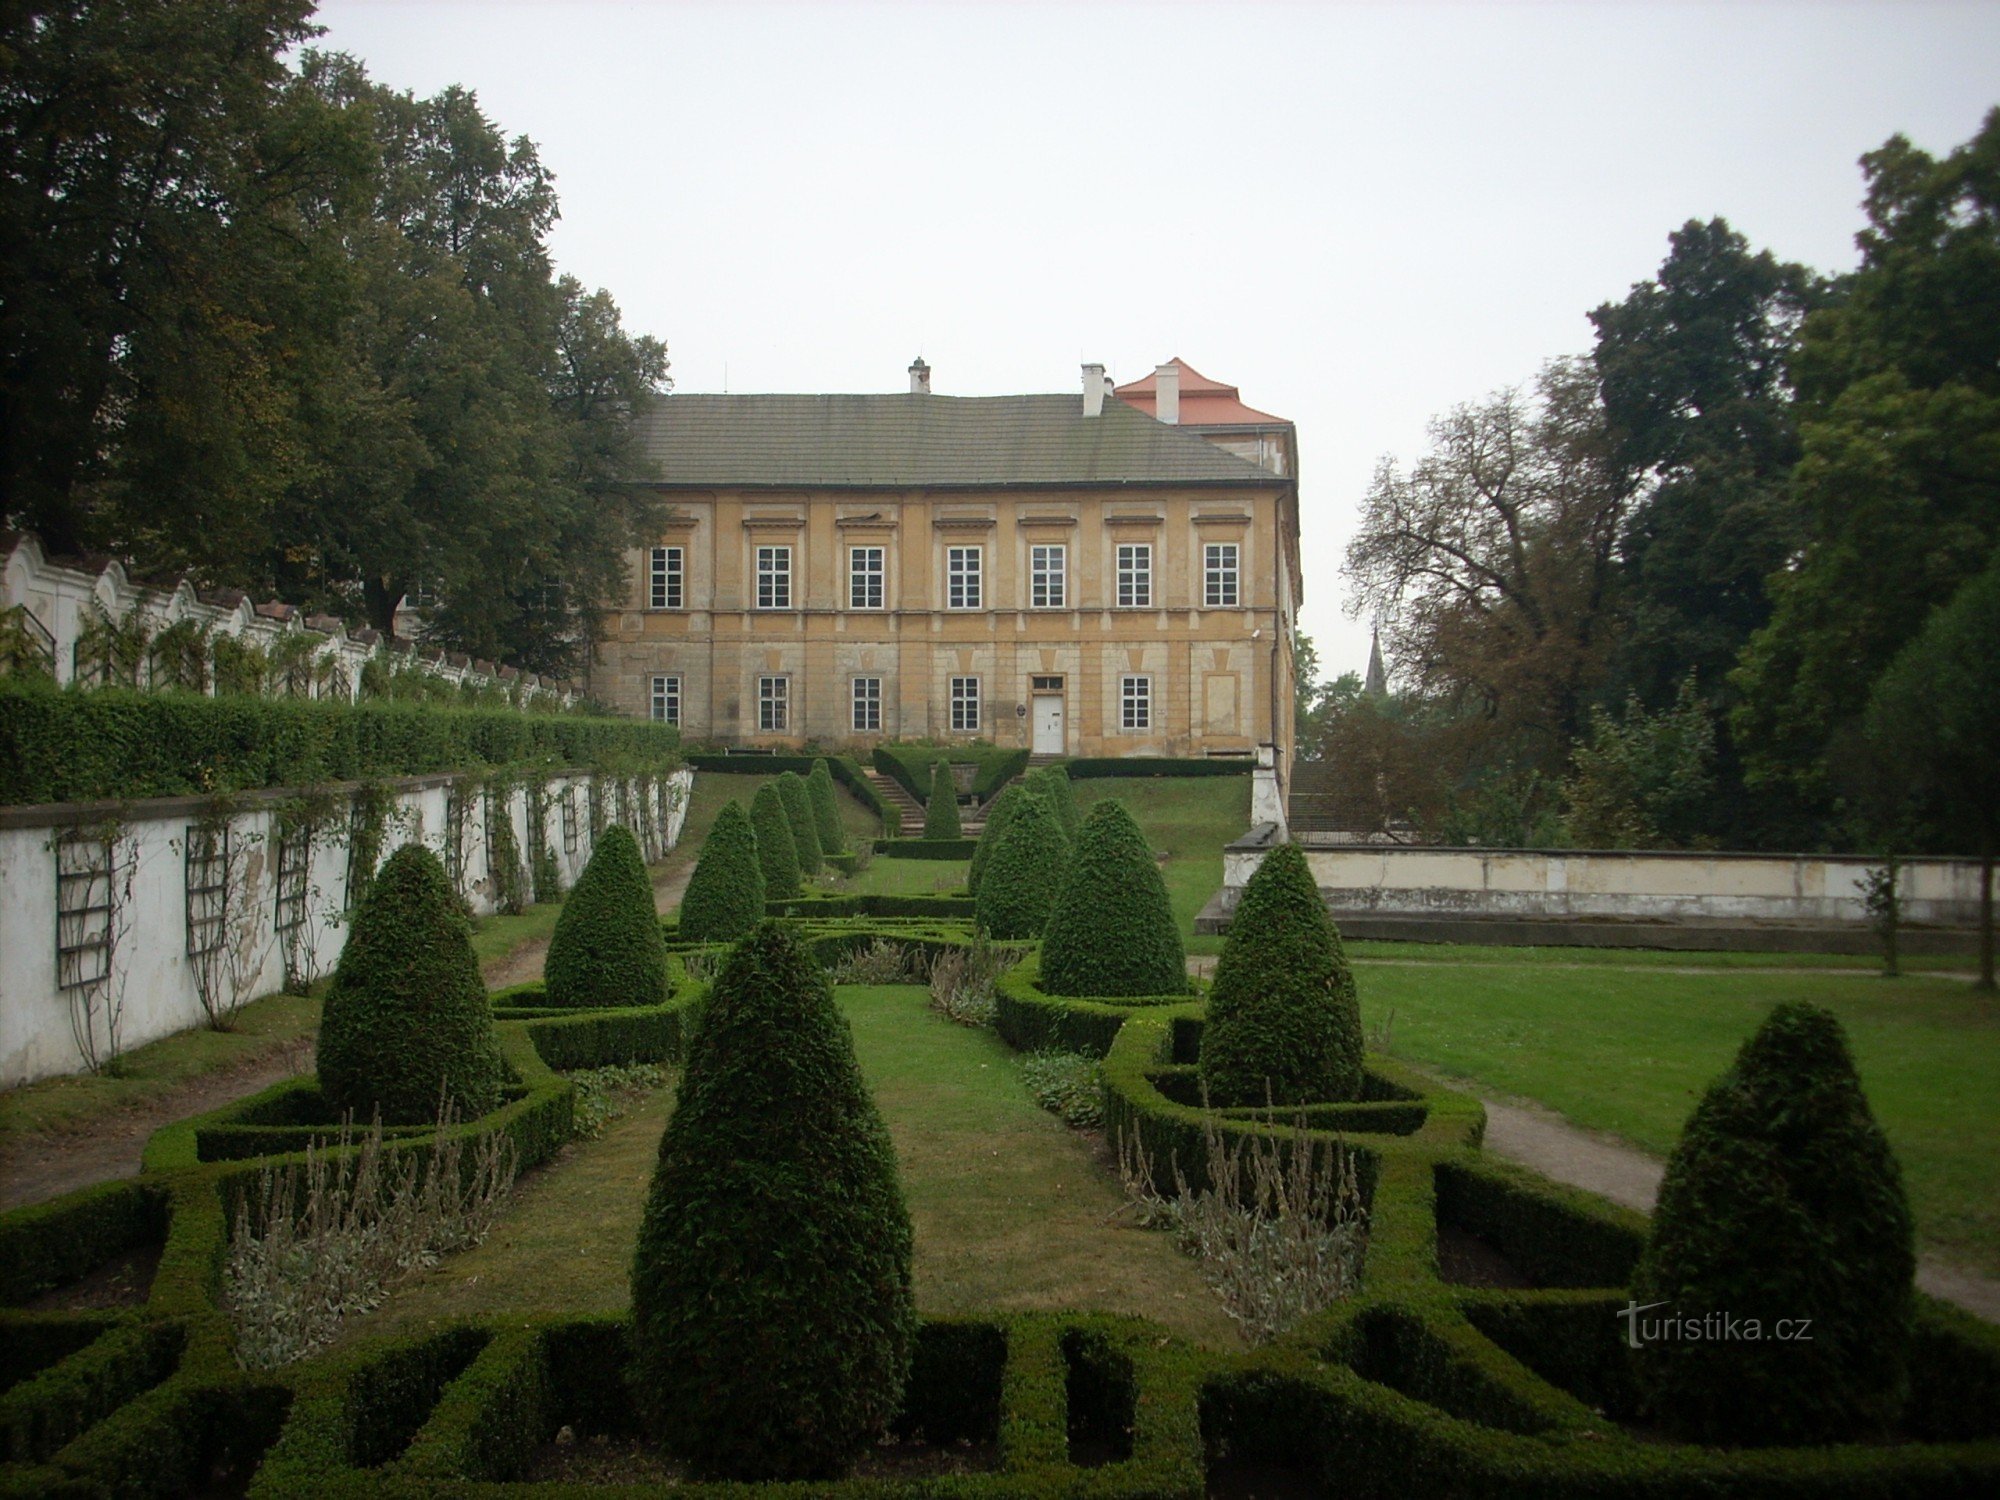 view of the castle with the castle gardens